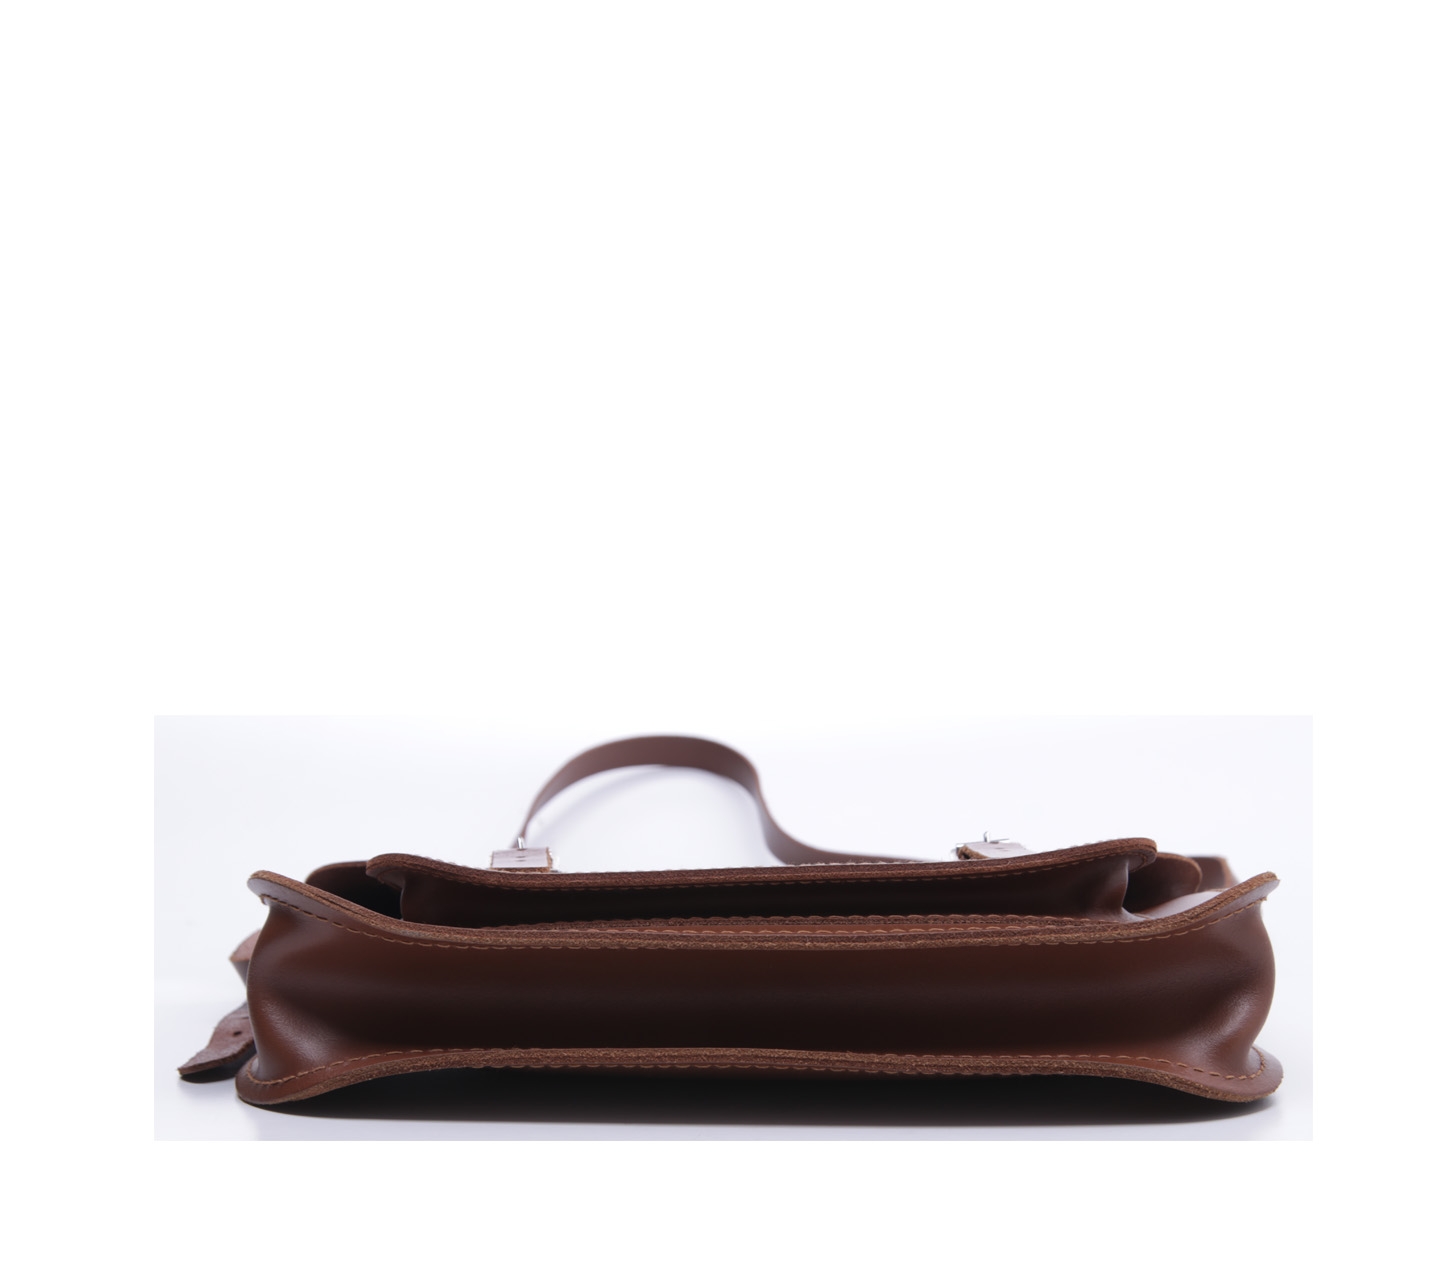 The Cambridge Satchel Company Brown Leather Sling Bag